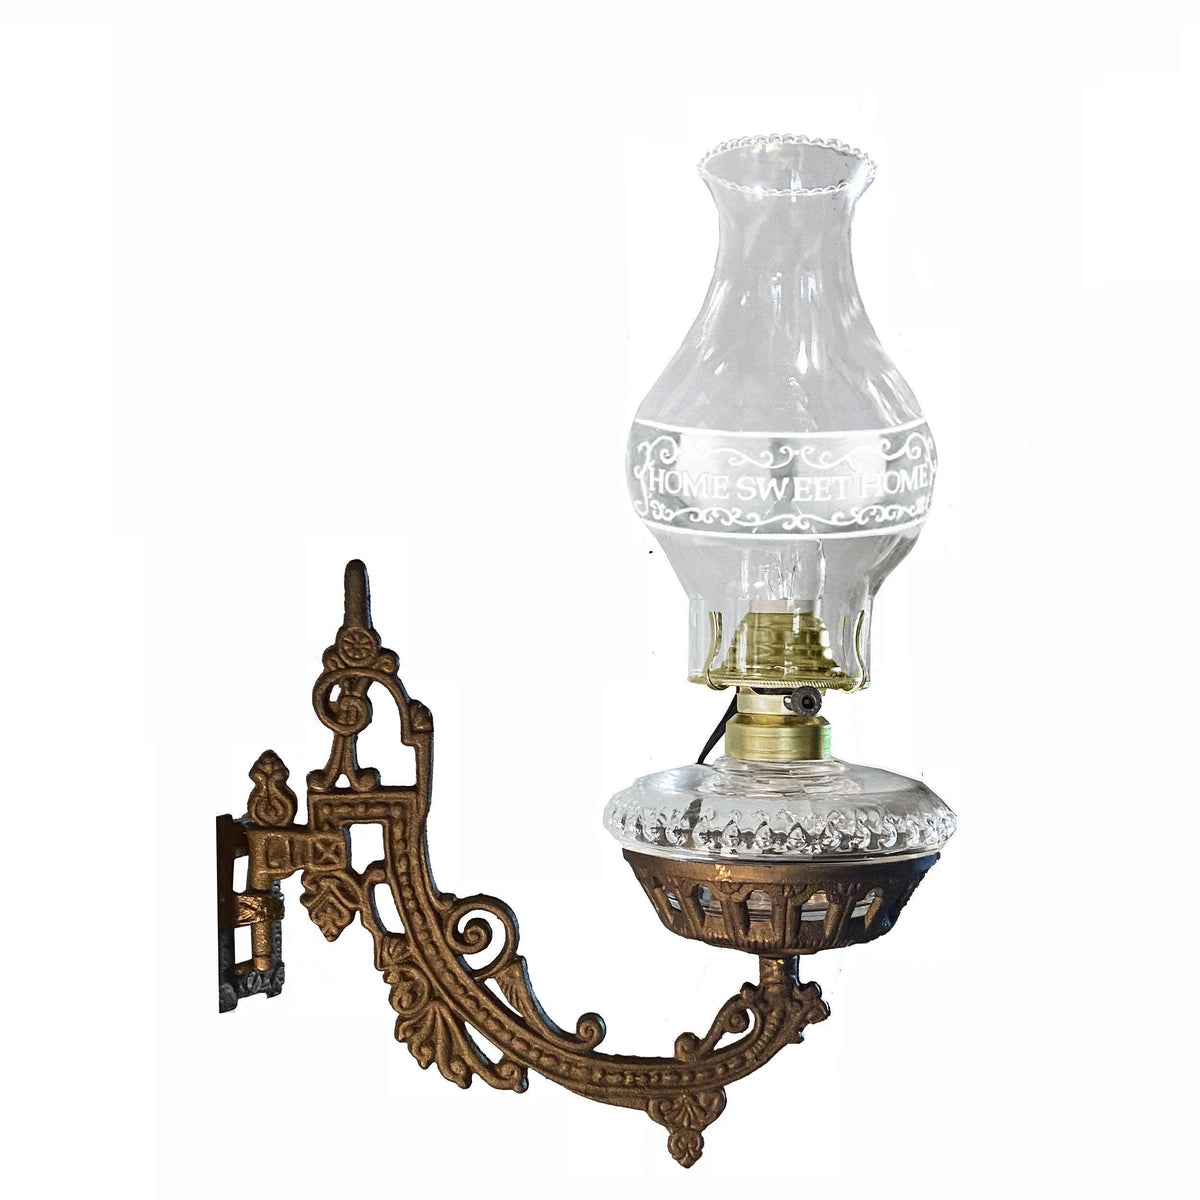 Vintage Home Sweet Home Wall Lamp, Paxton Hardware